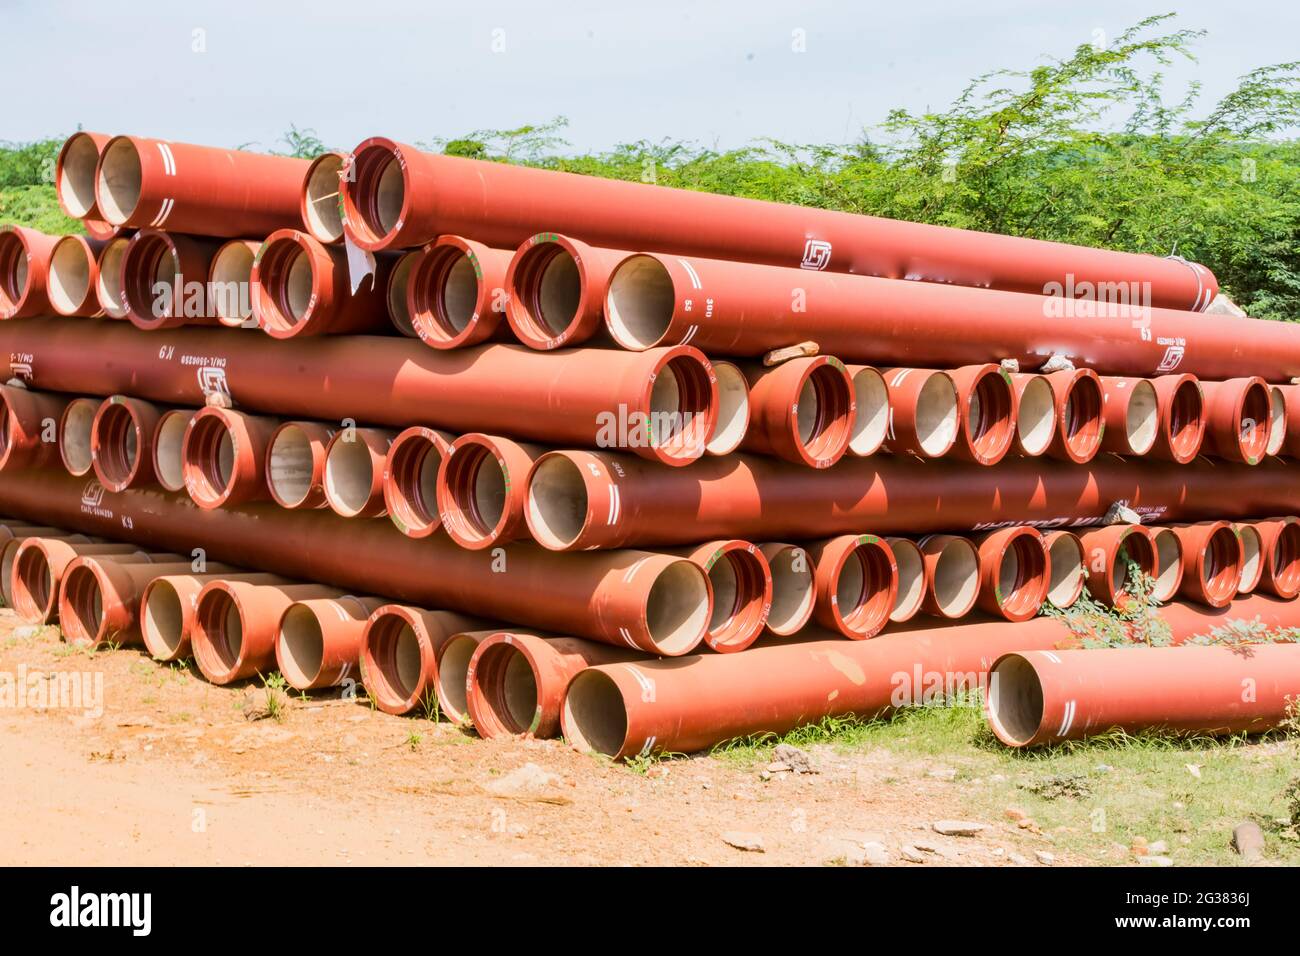 ductile iron pipes stocked in open space of a rural village store yard. Stock Photo